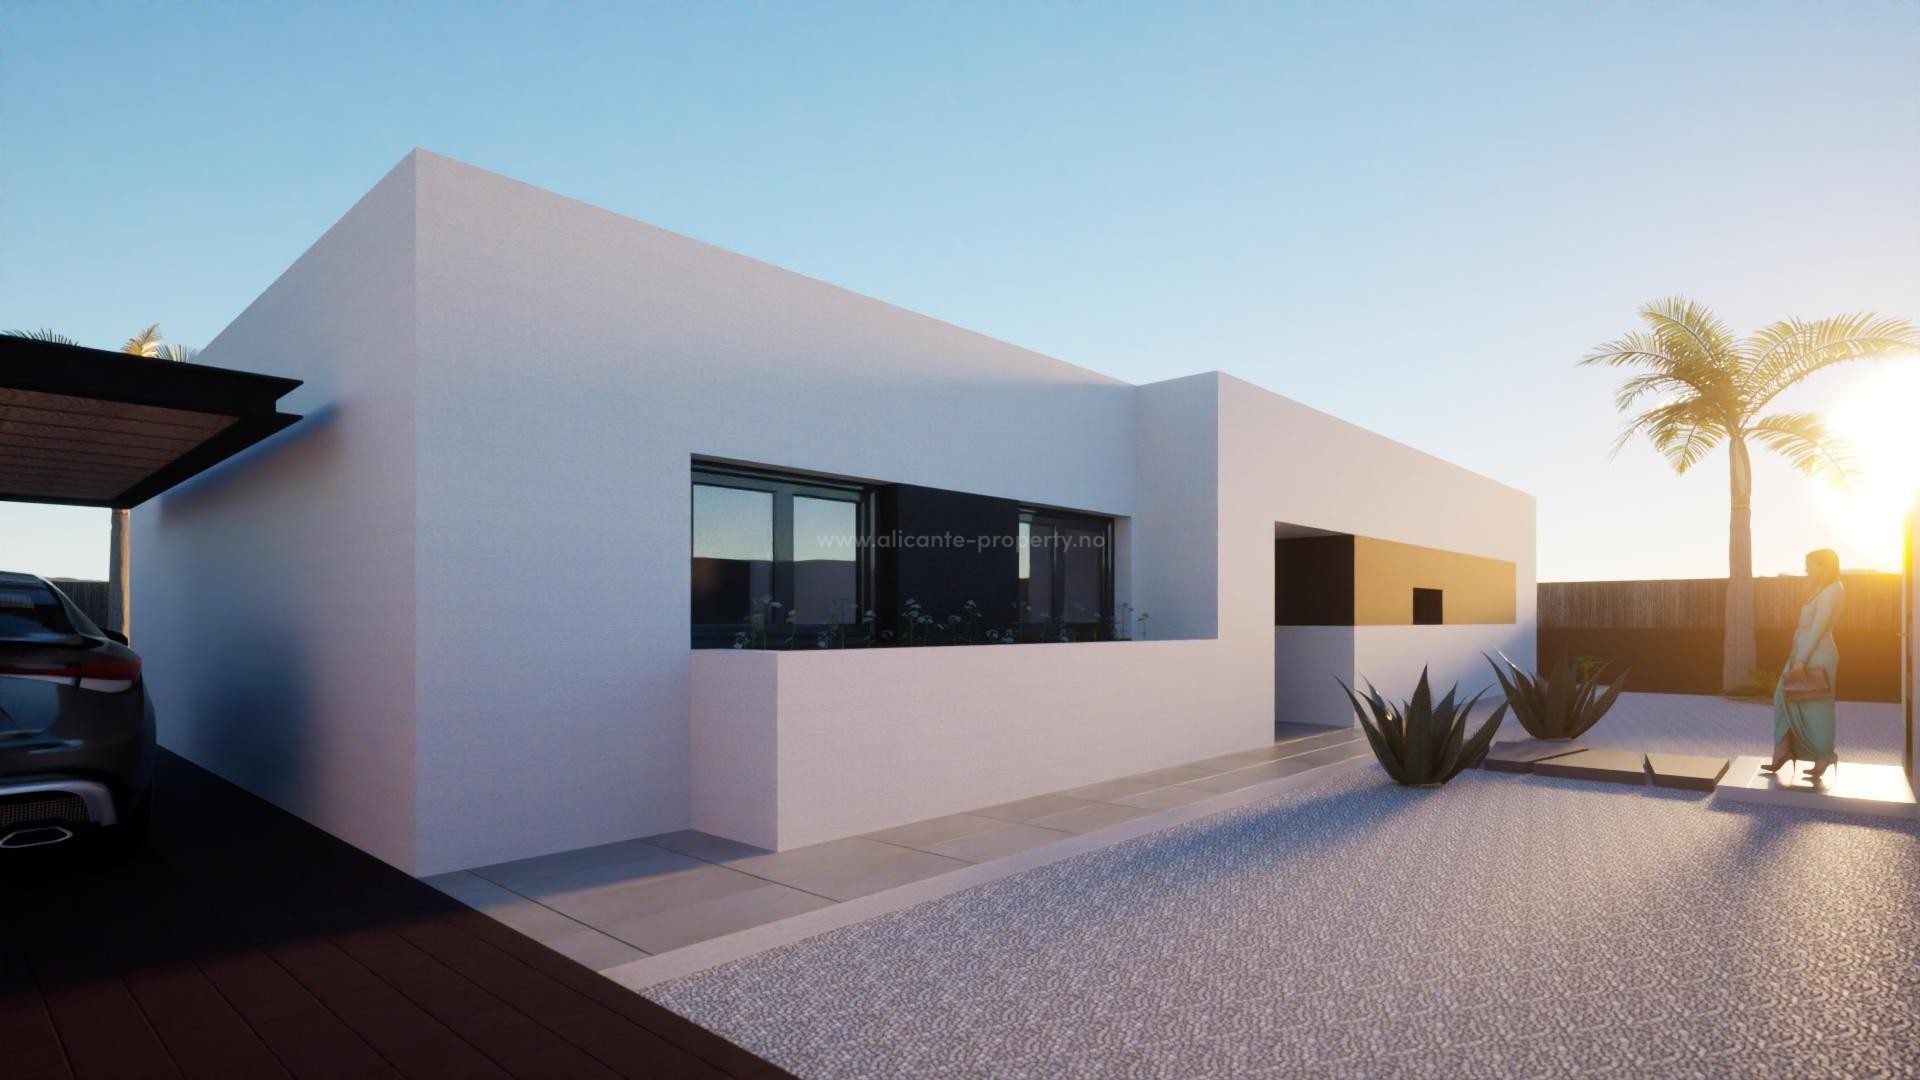 Brand new houses/villas in Alfaz del Pi, 3 bedrooms, 2 bathrooms, a very large living room plus dining room and American kitchen, large patio with pool